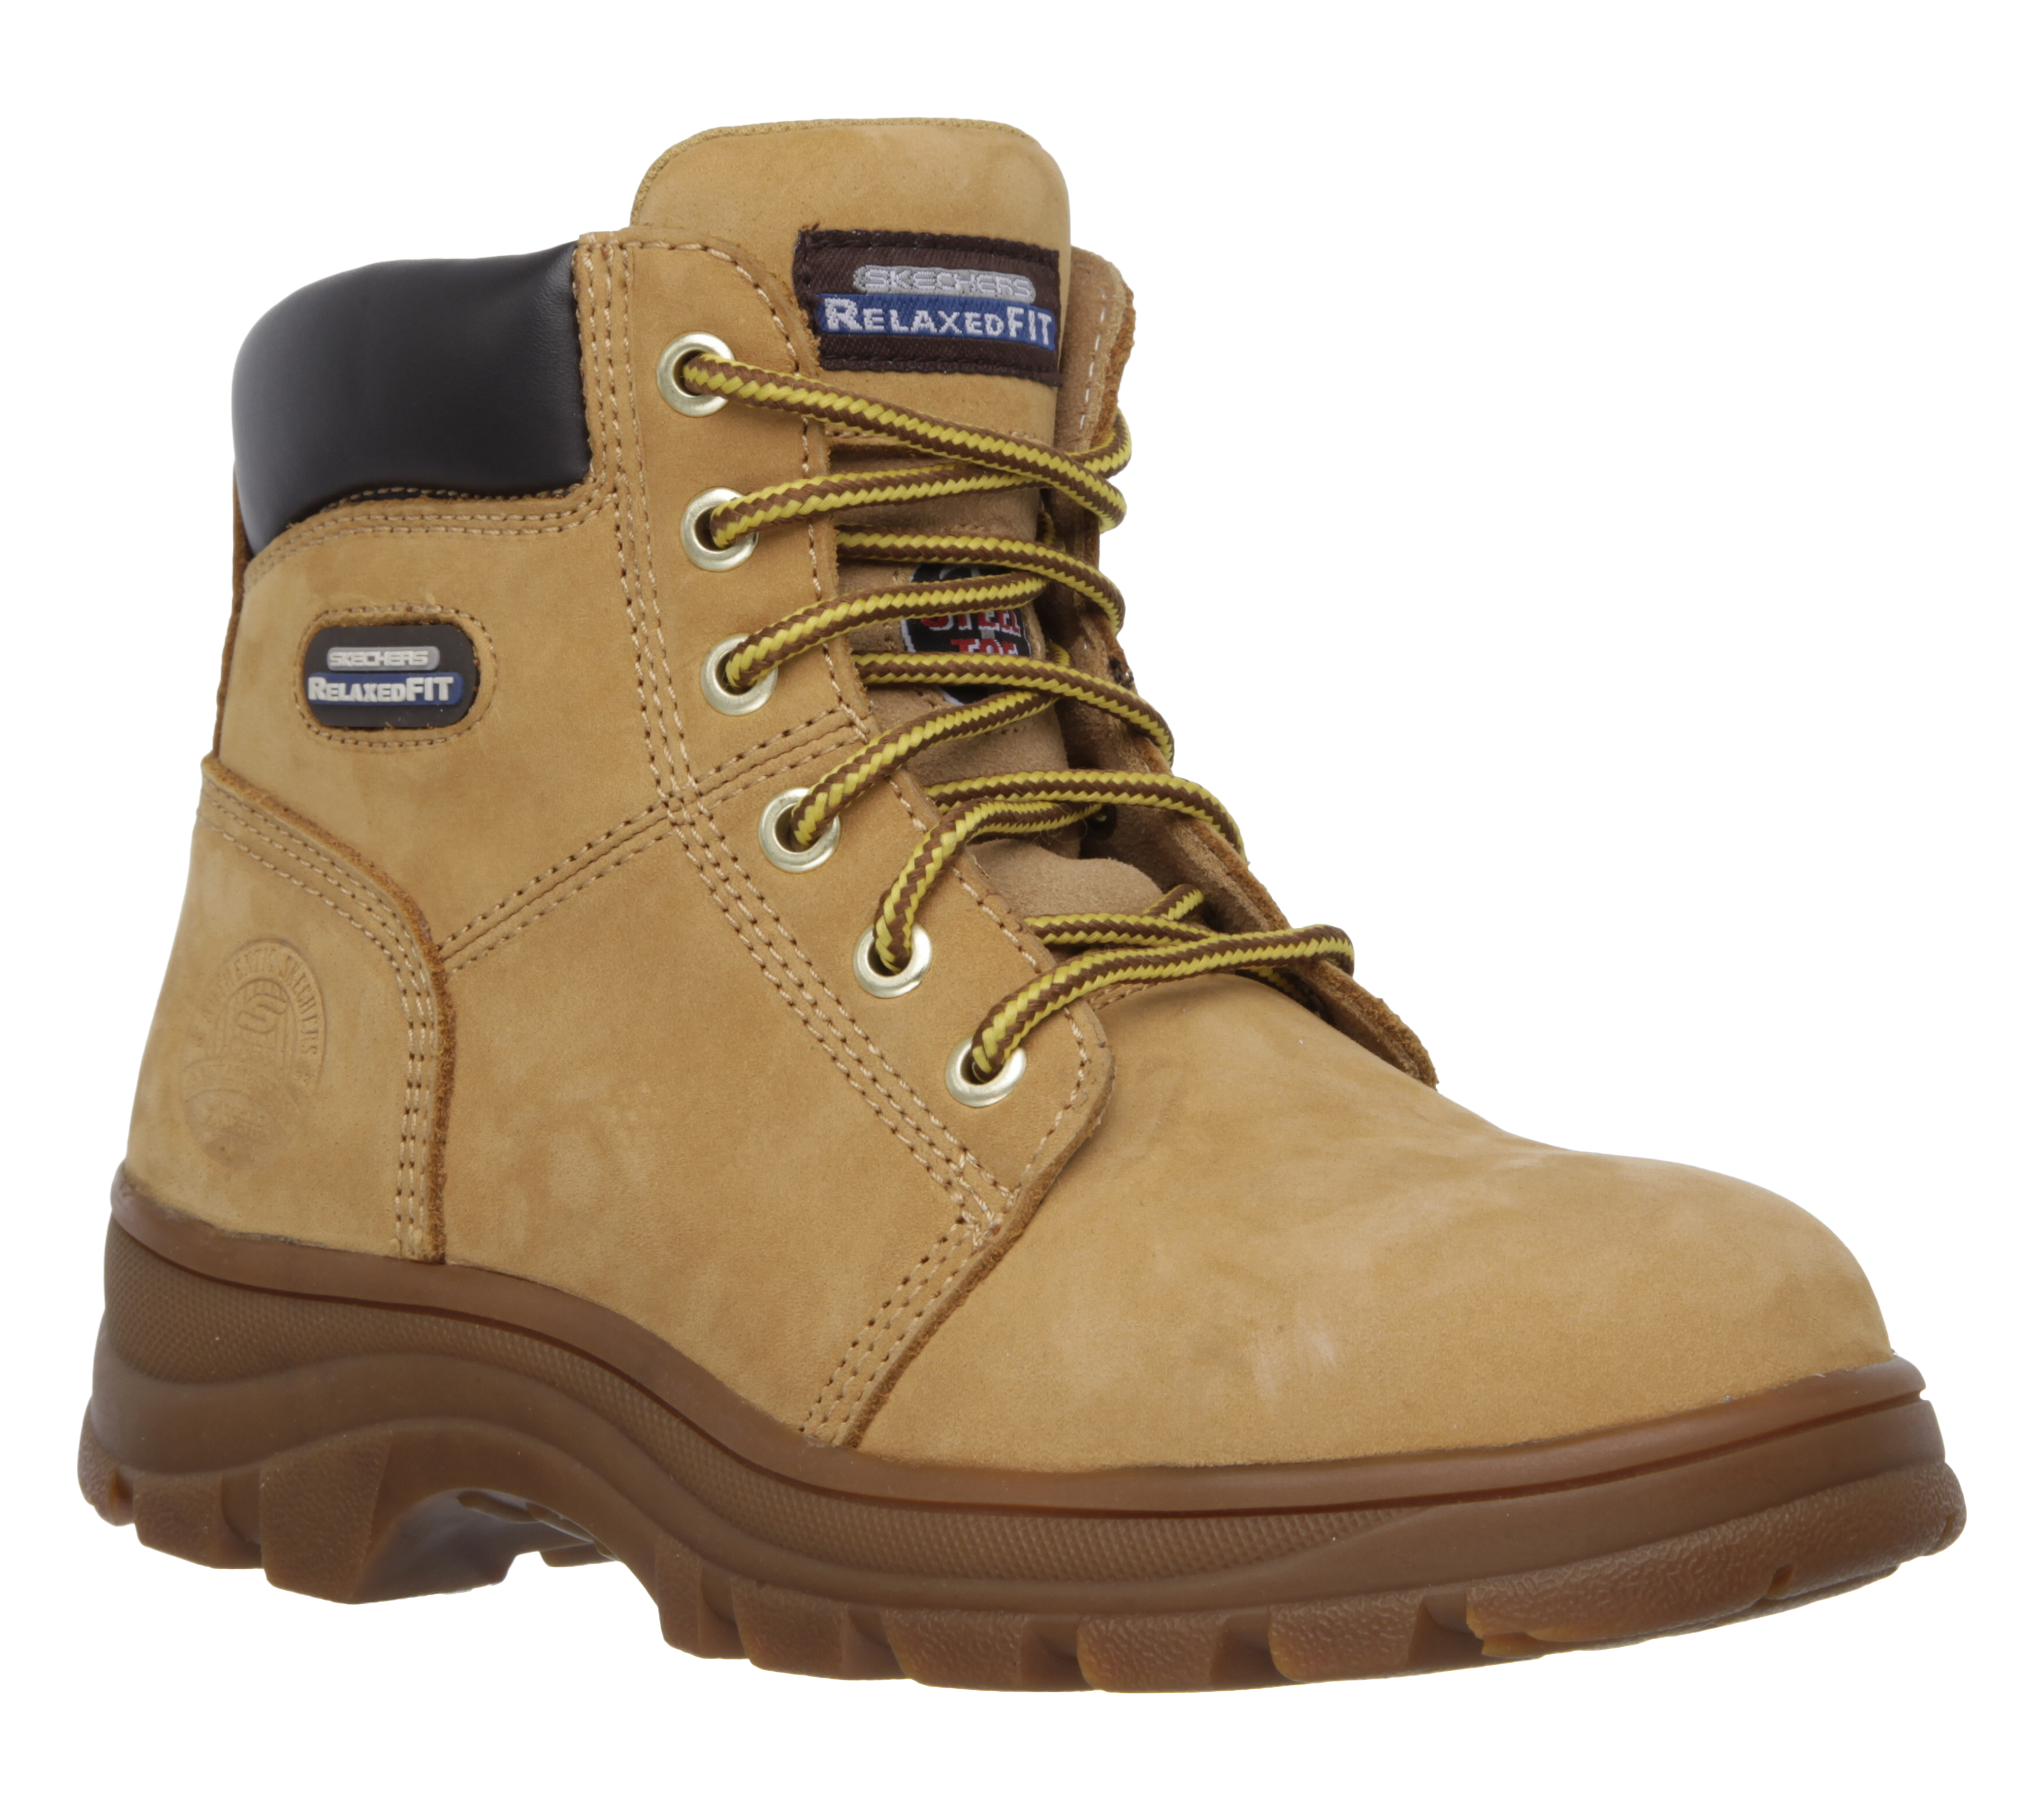 skechers safety toe shoes